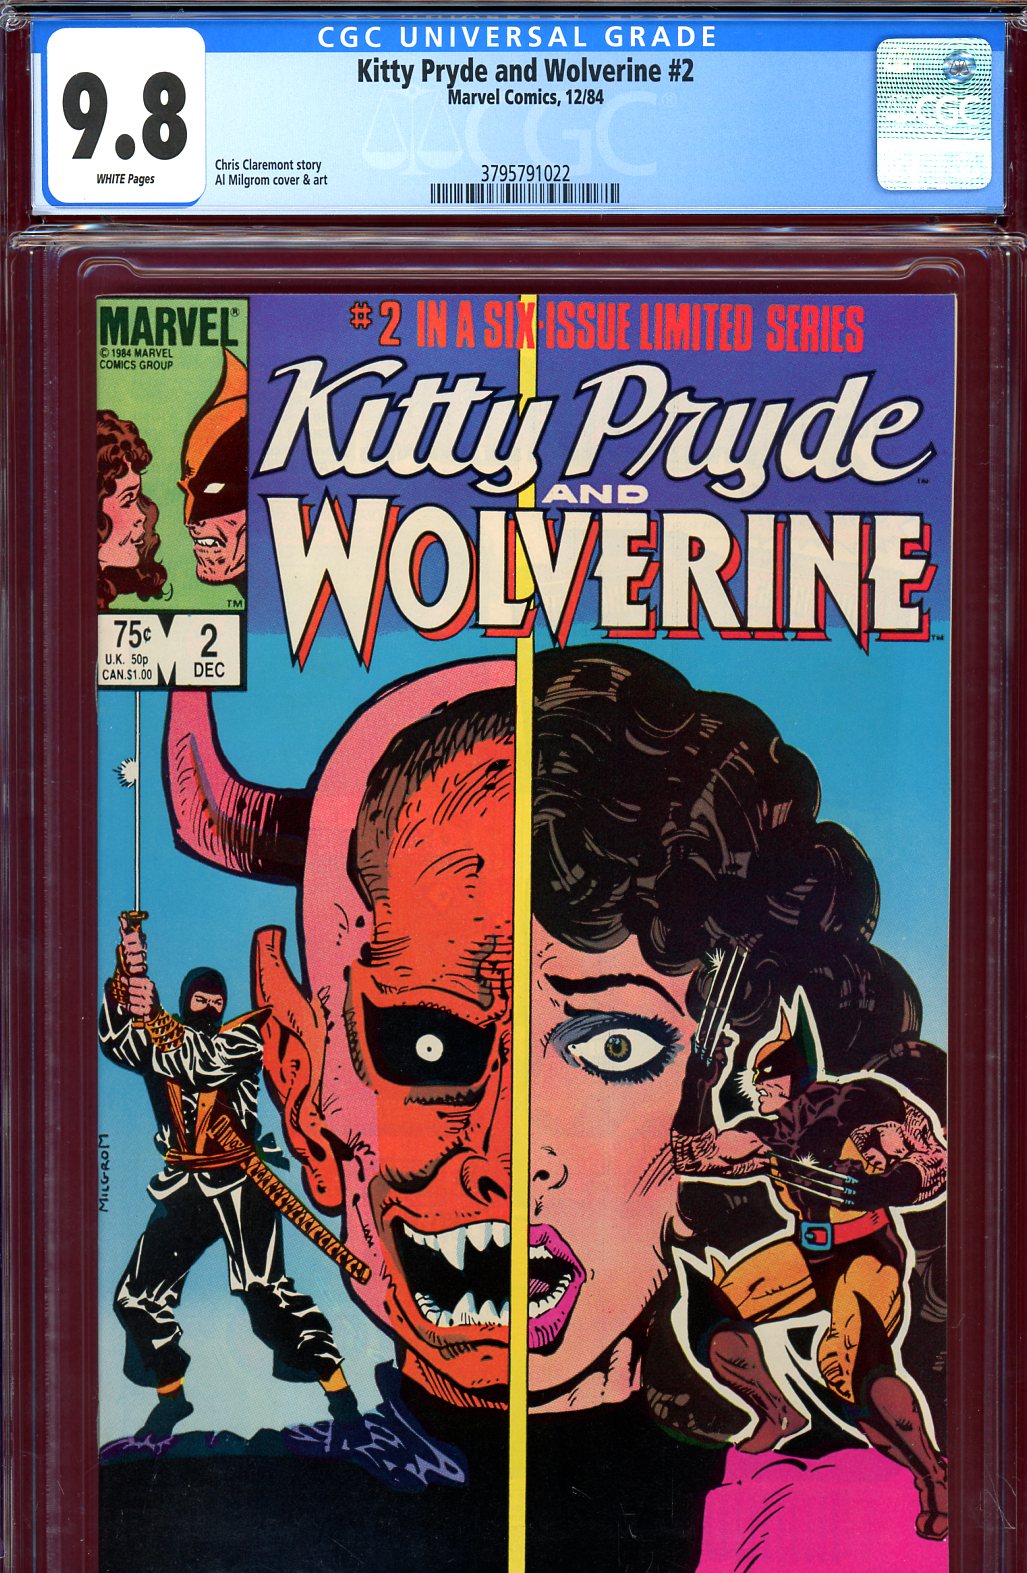 Kitty Pryde and Wolverine #2 CGC 9.8 w